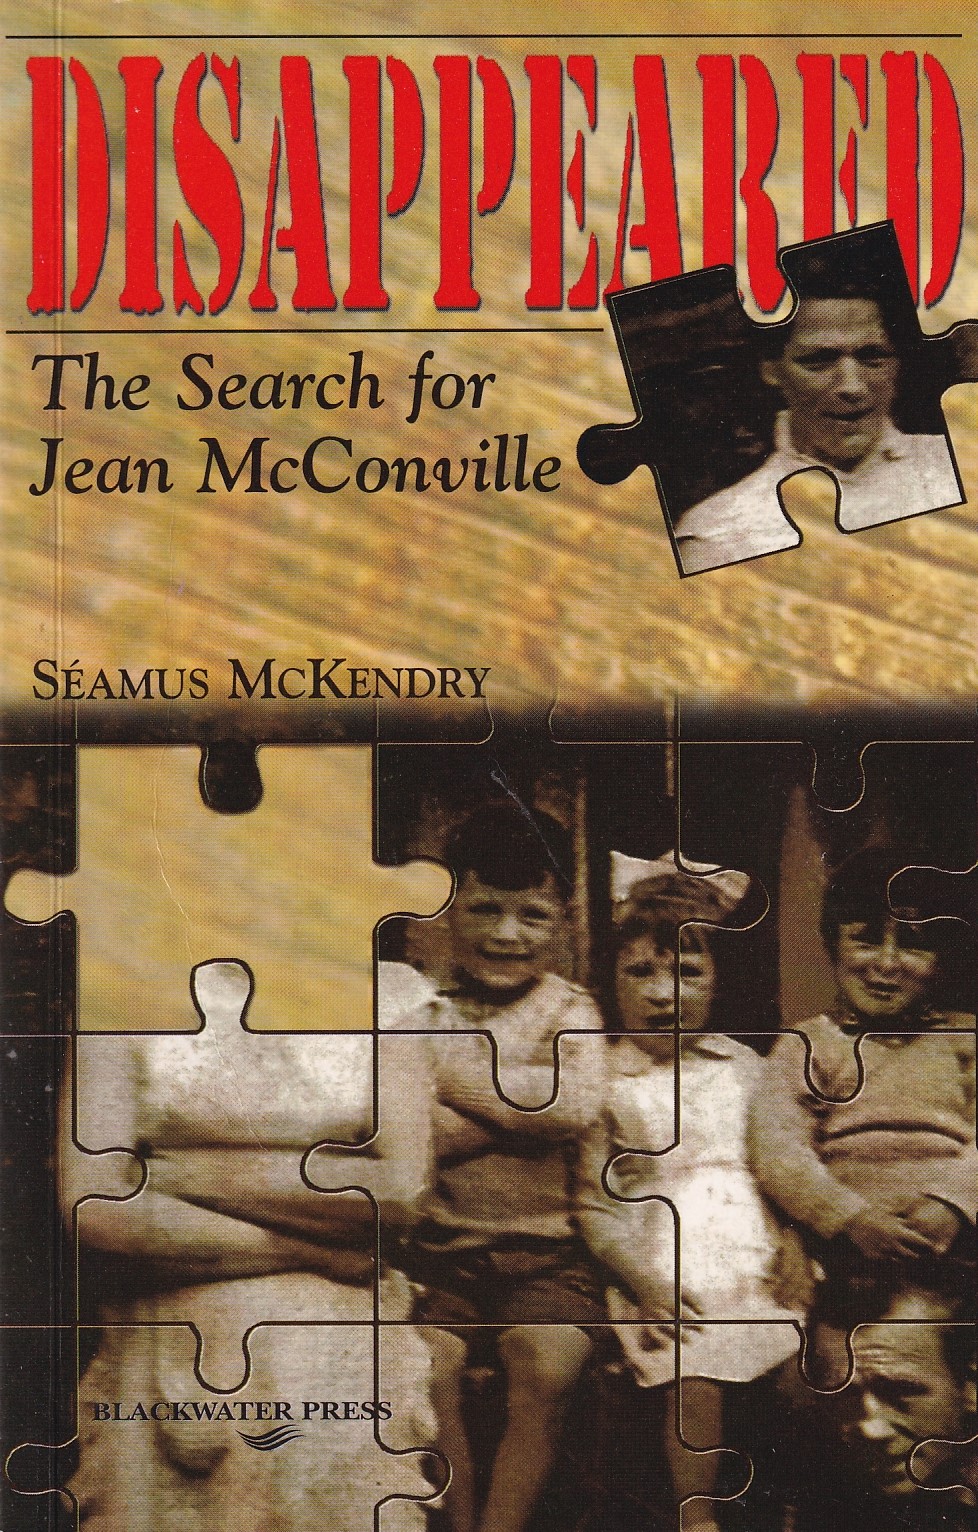 Disappeared : The Search for Jean McConville | Seamus McKendry | Charlie Byrne's